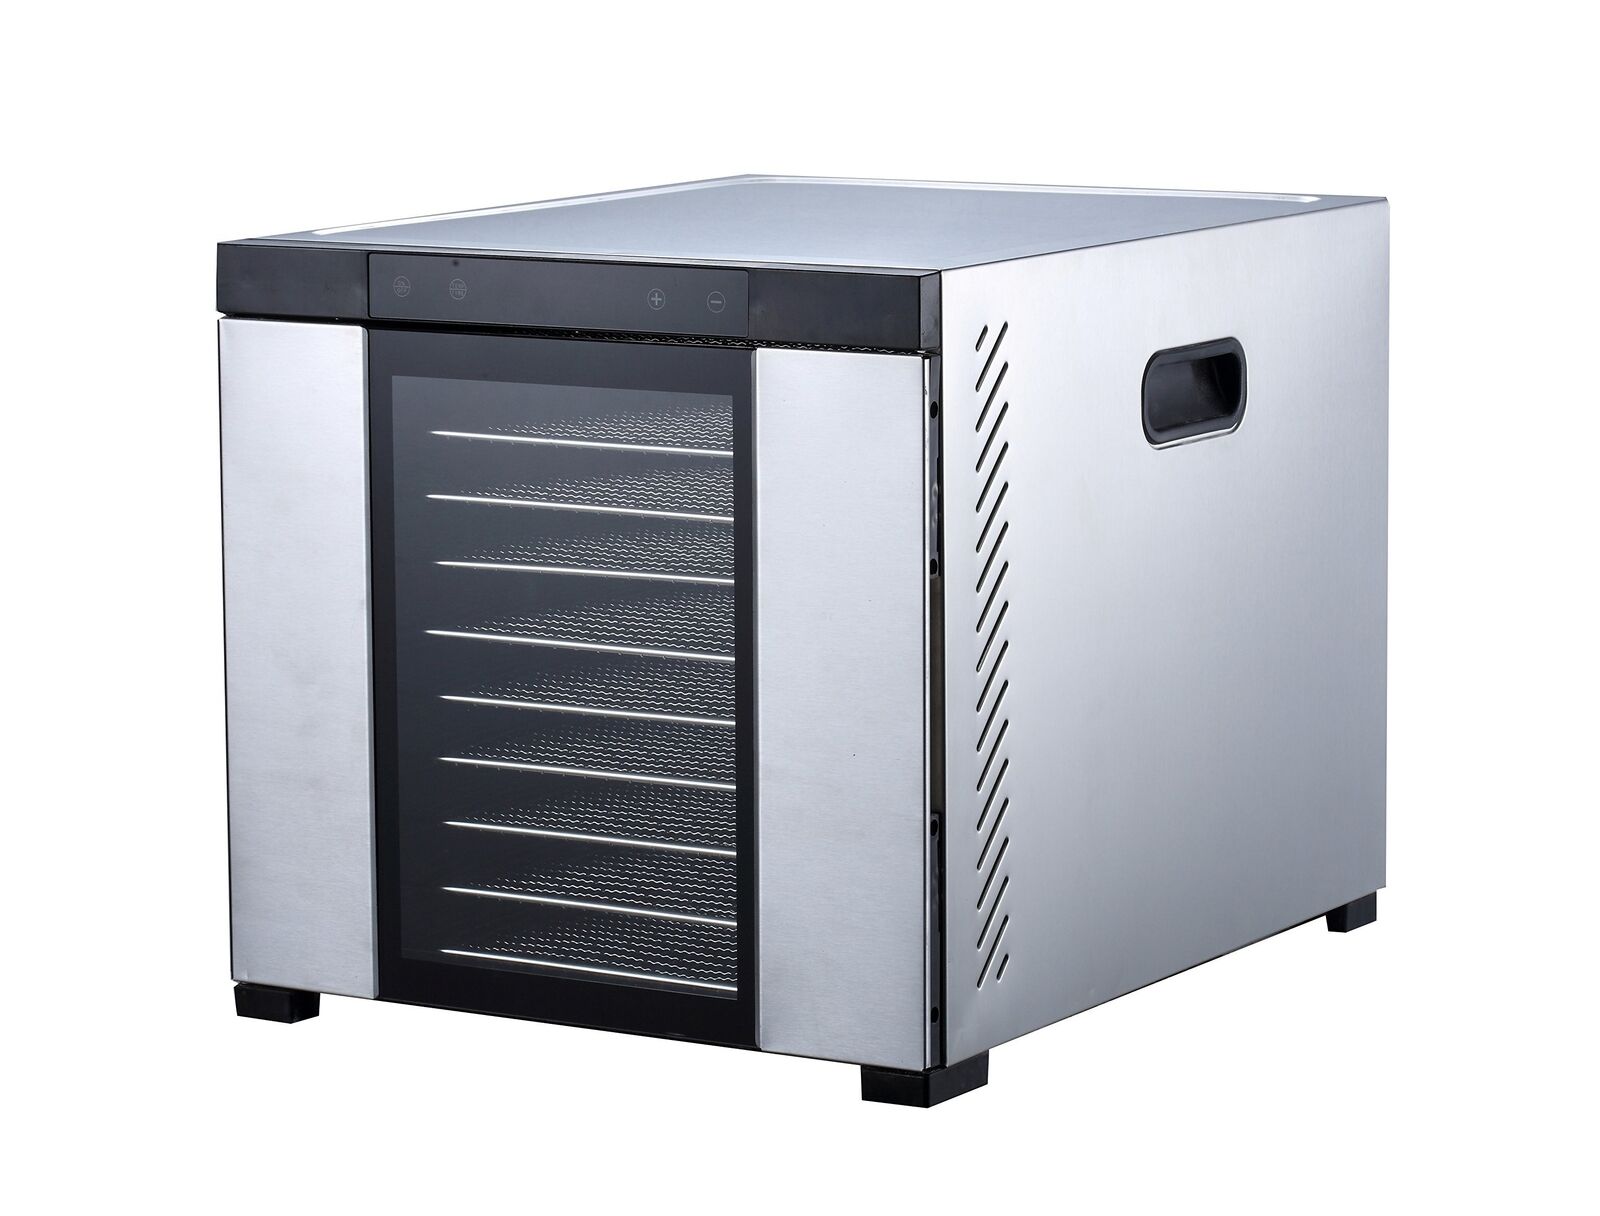 Samson "Silent" 10 Tray Stainless Steel Dehydrator with Glass Door and Digita...